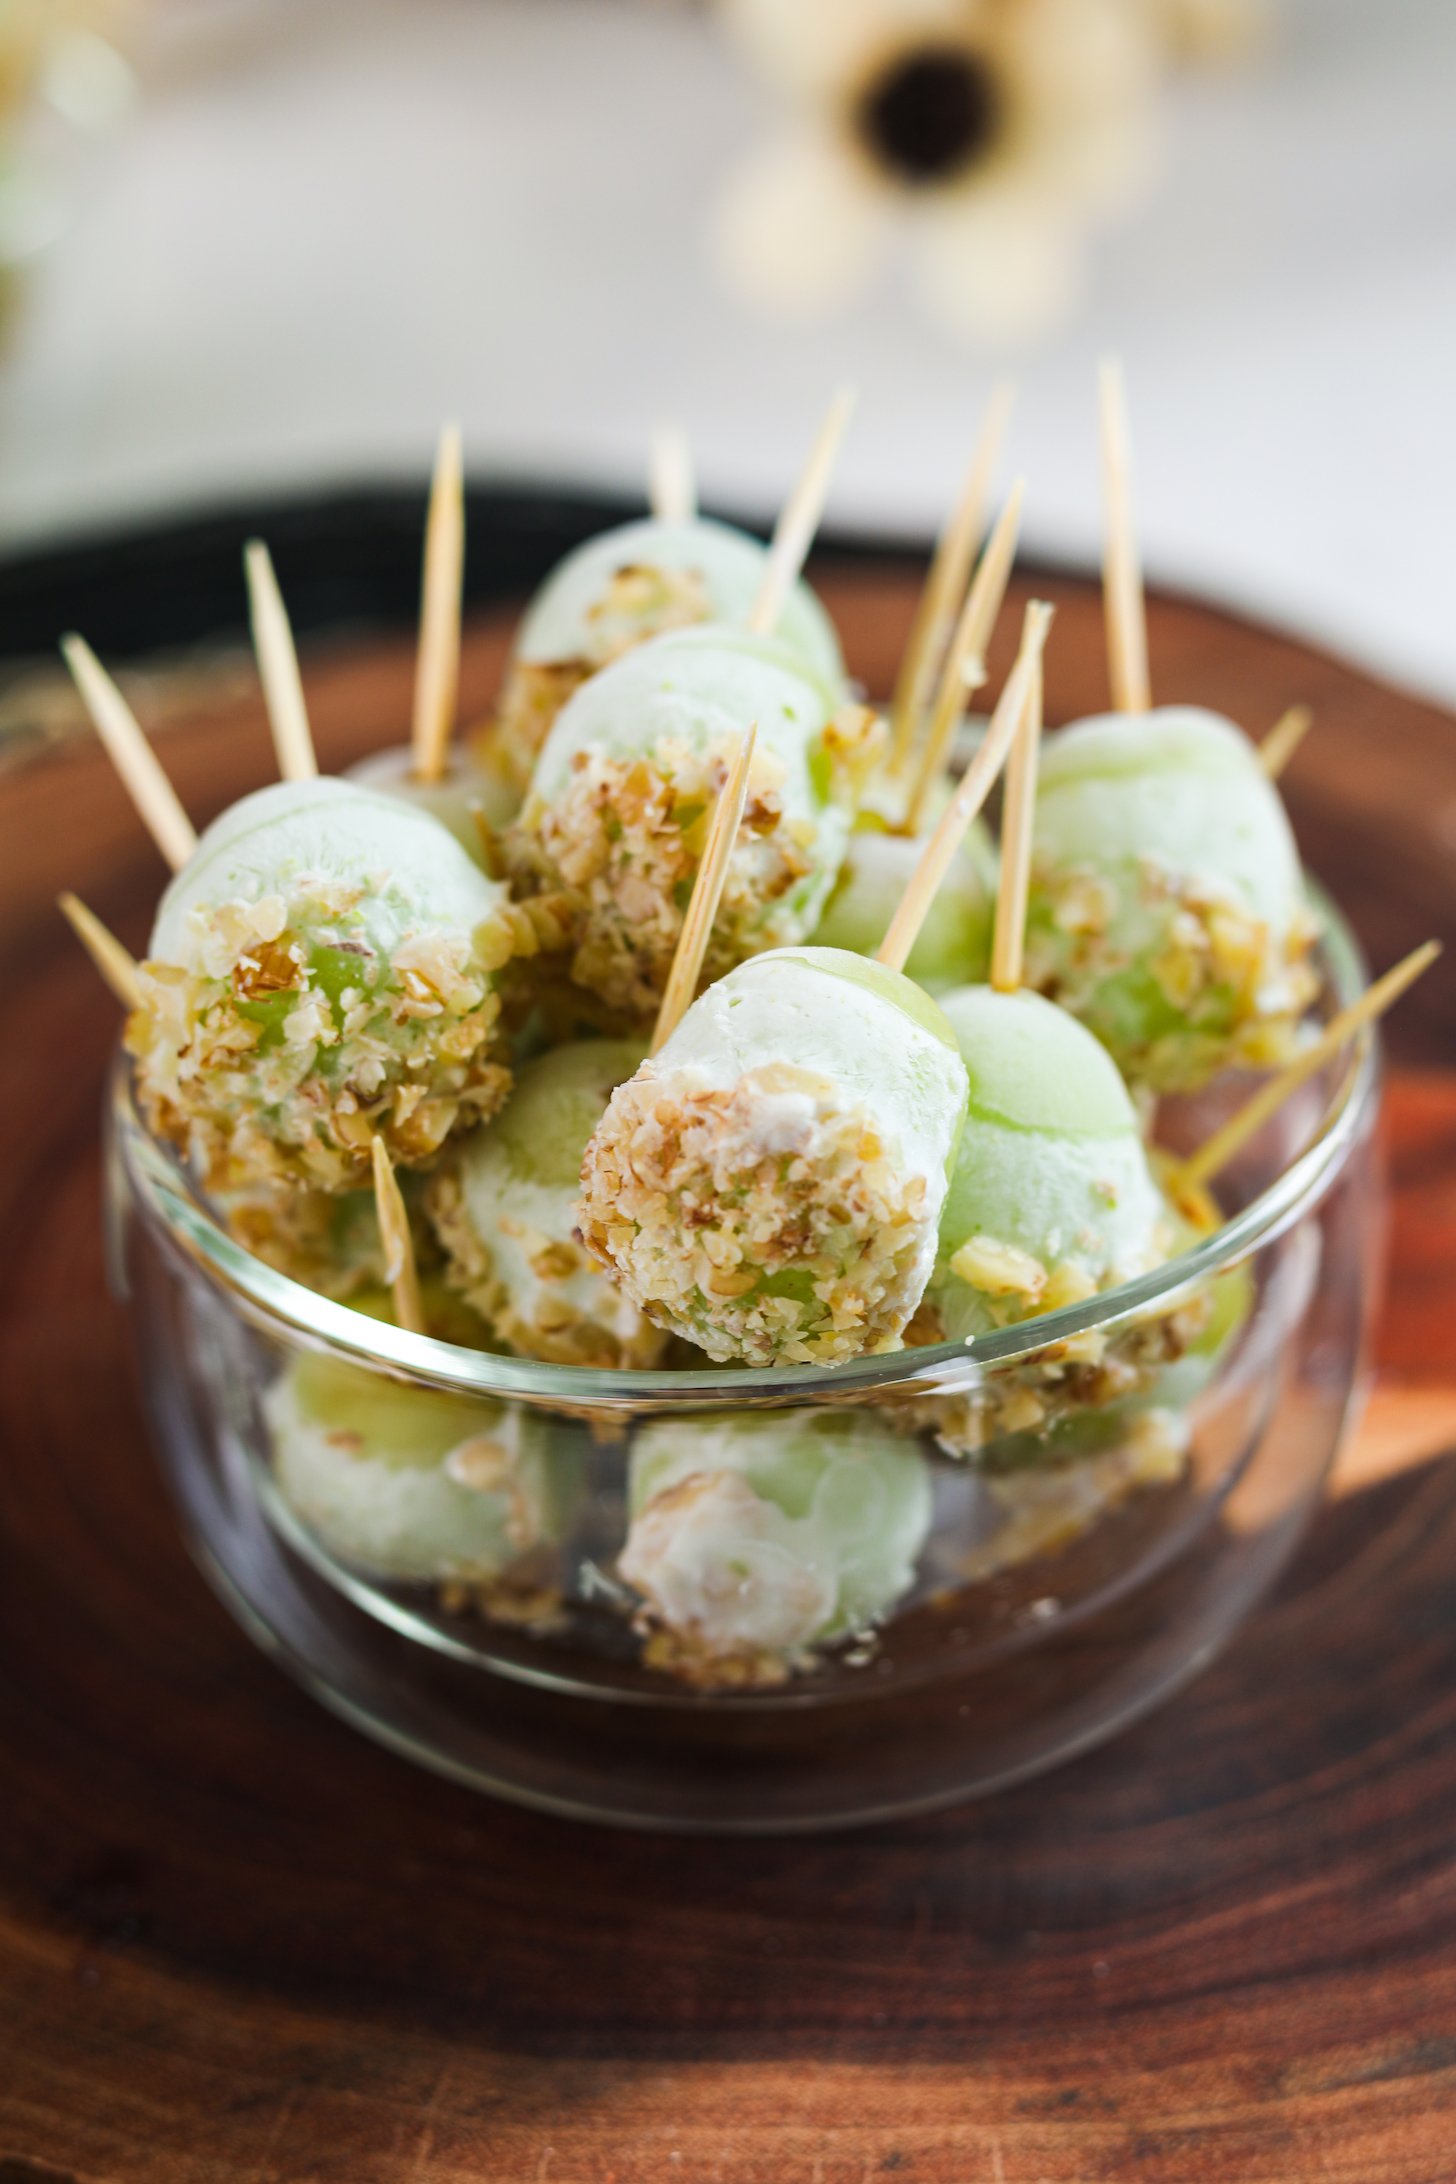 An image displays a bowl filled with grapes on wooden picks, coated in yogurt, and garnished with crushed nuts.